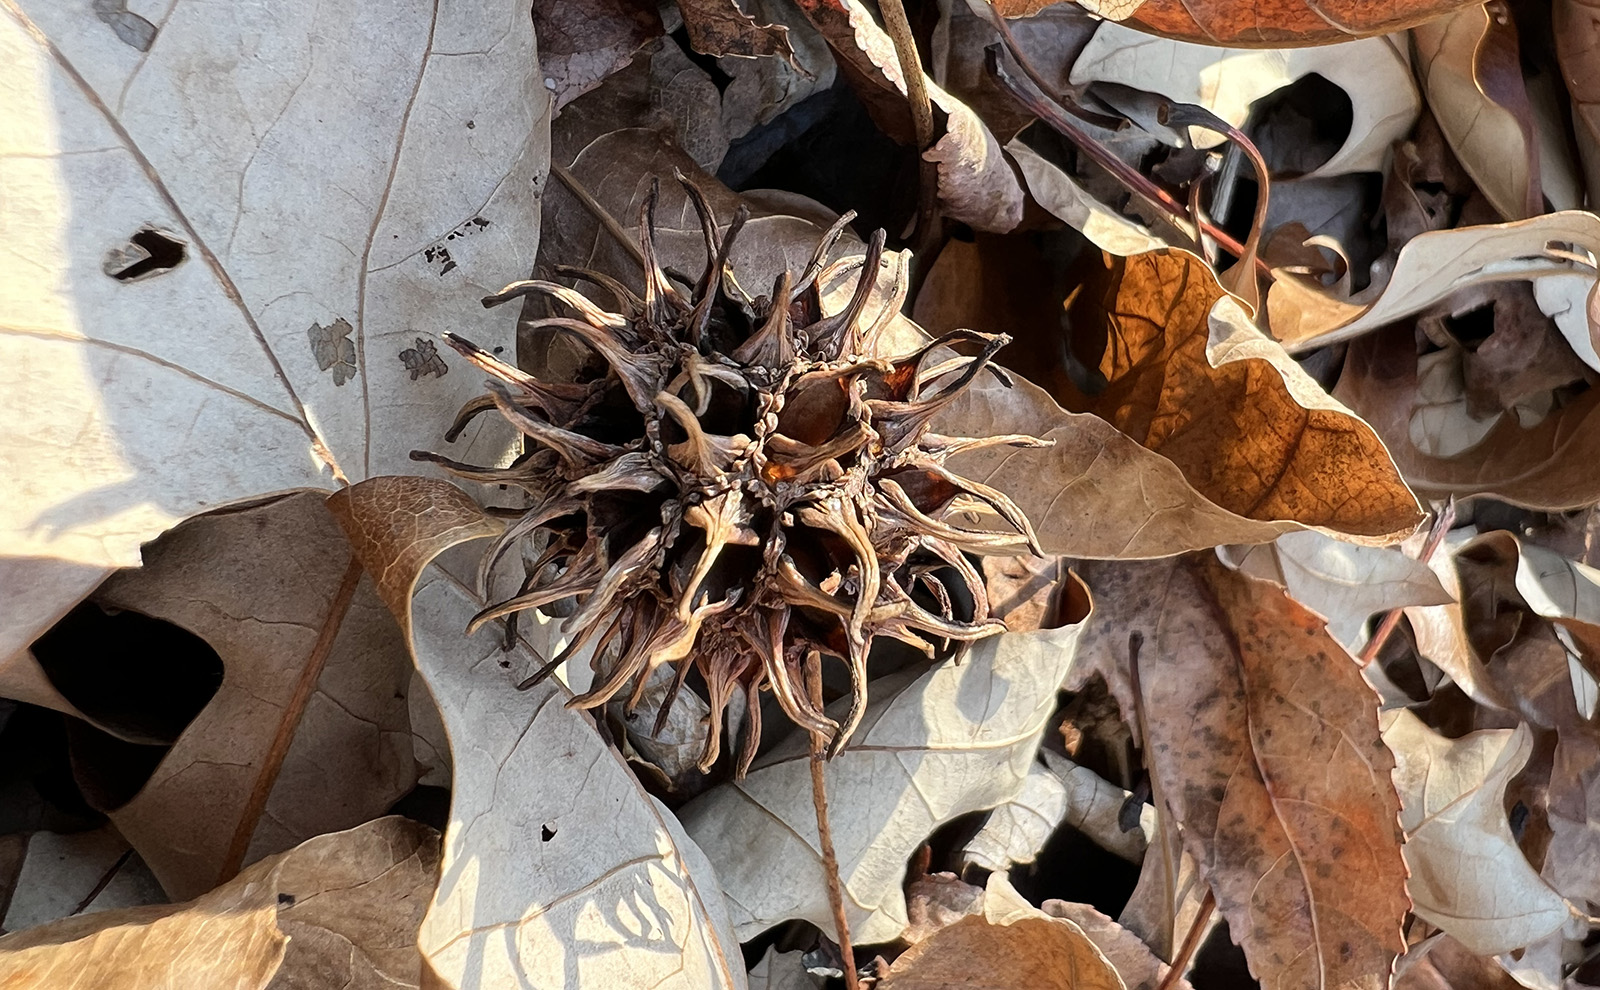 A sweet gum seed ball - a spiky, round, dried ball - among dead leaves.